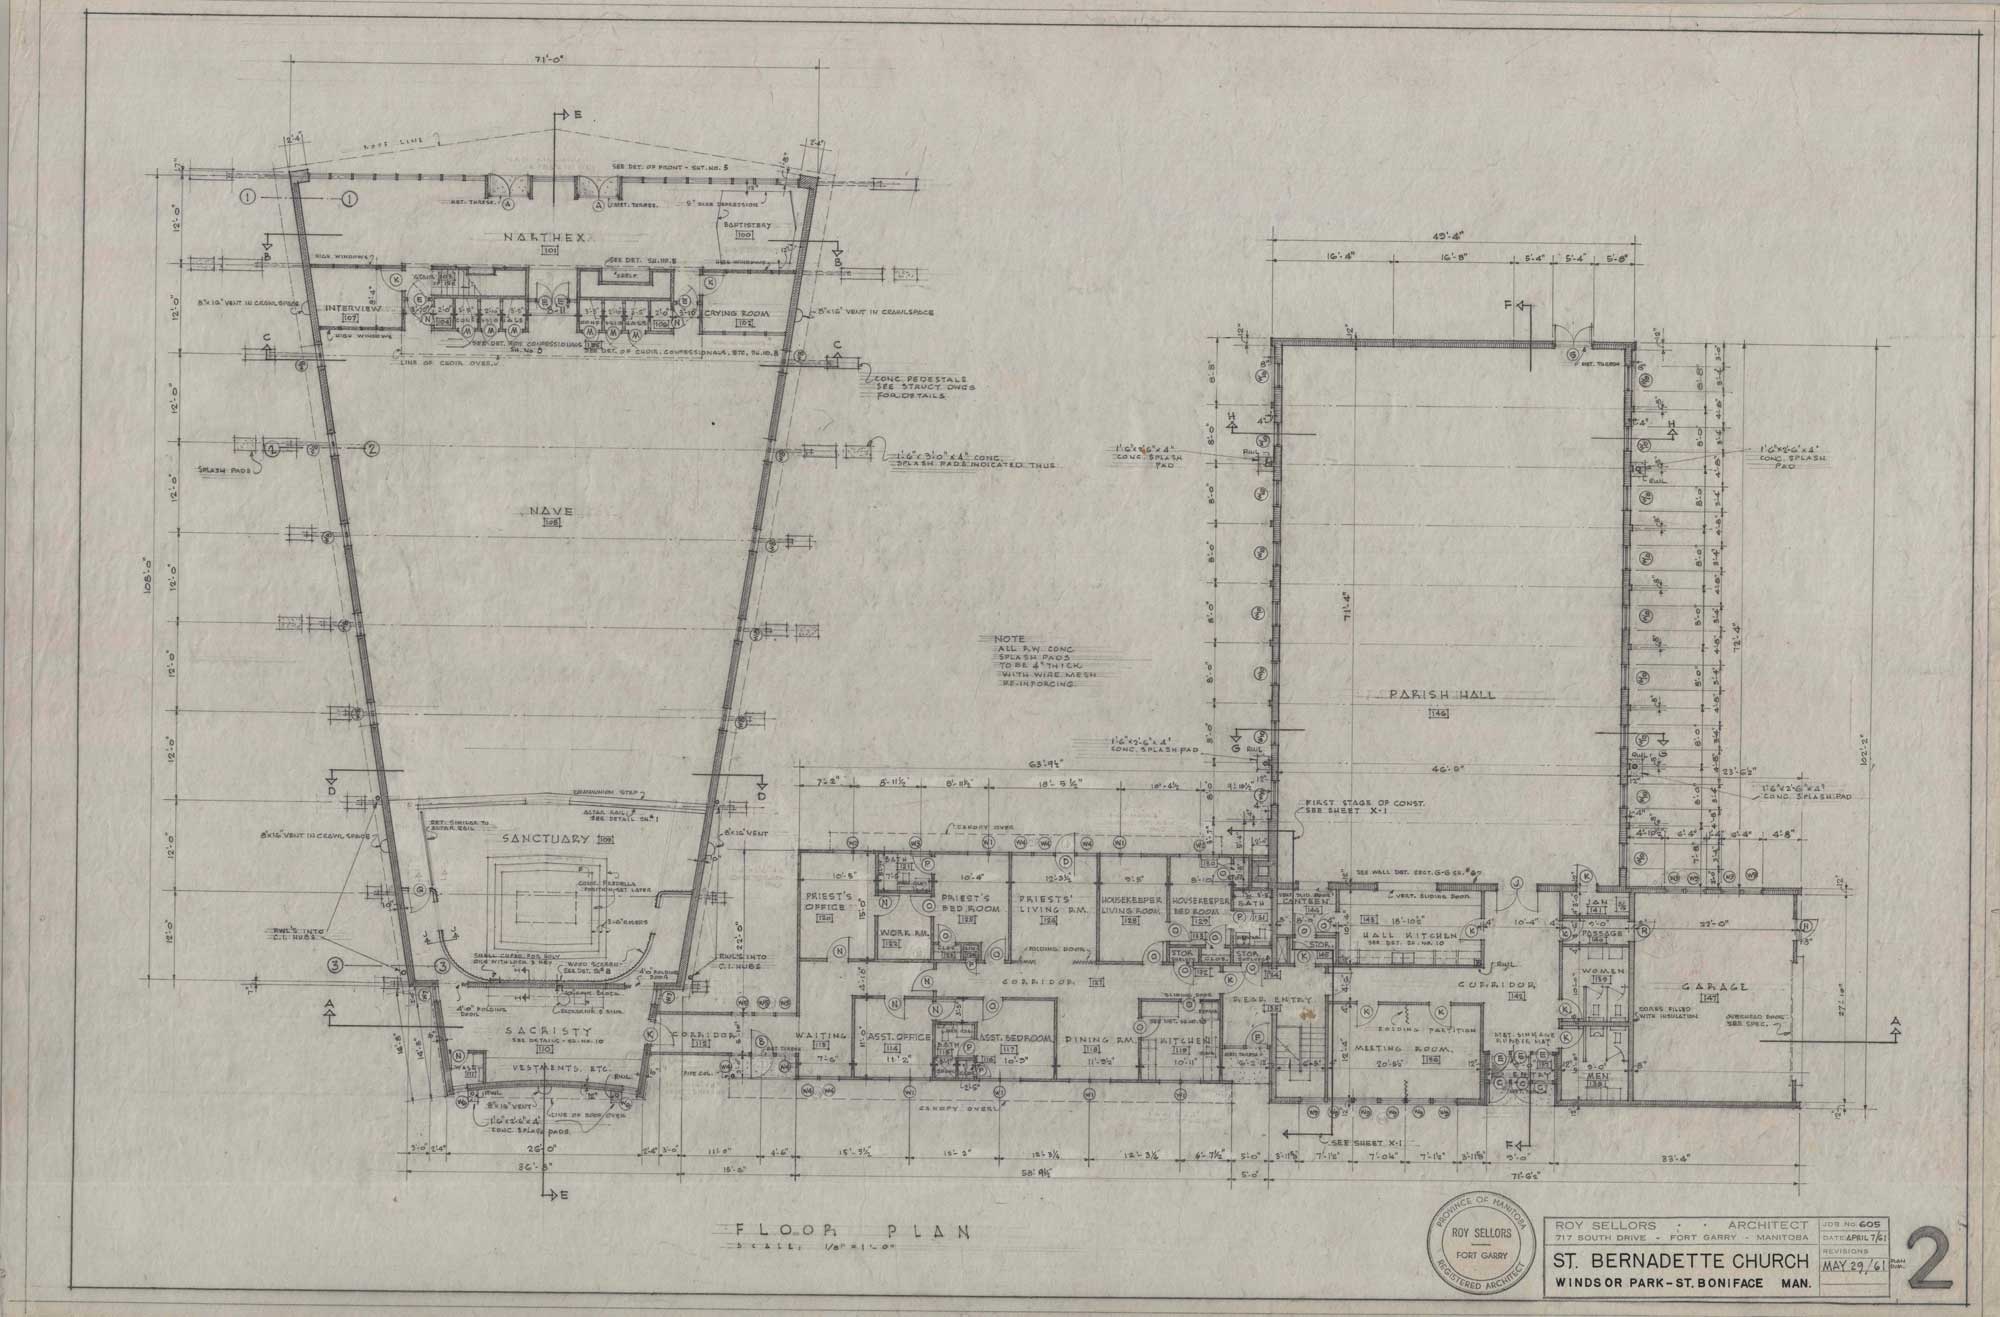 Image shows drawing of the main floor plan for St. Bernadette Church. The drawing shows the nave and the parish hall, as well as technical details.